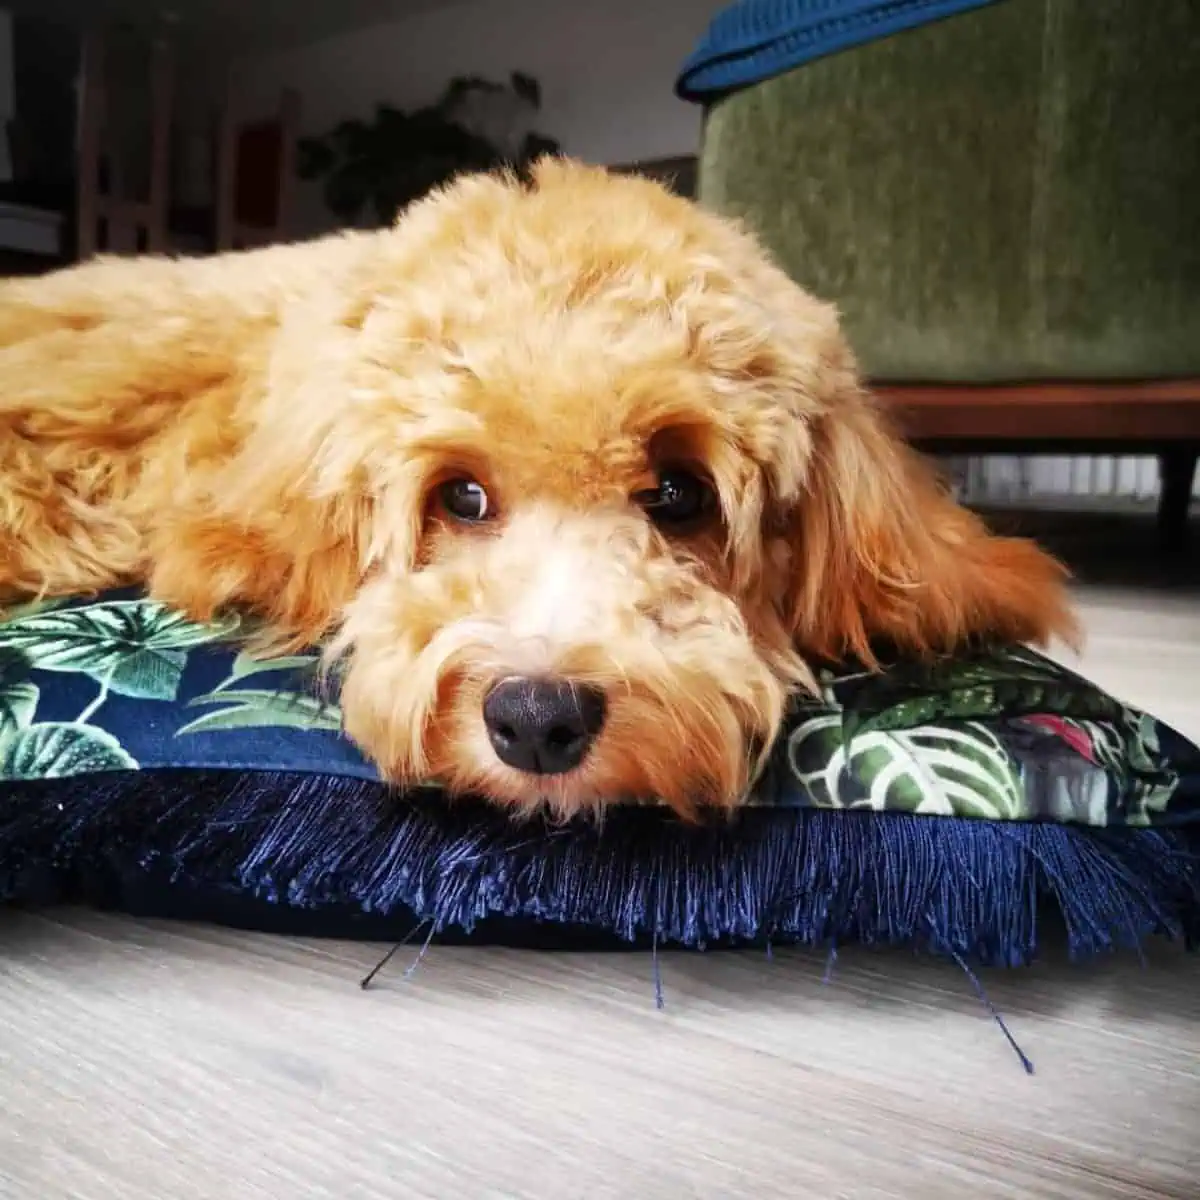 well-behaved Cavapoo on its pillow